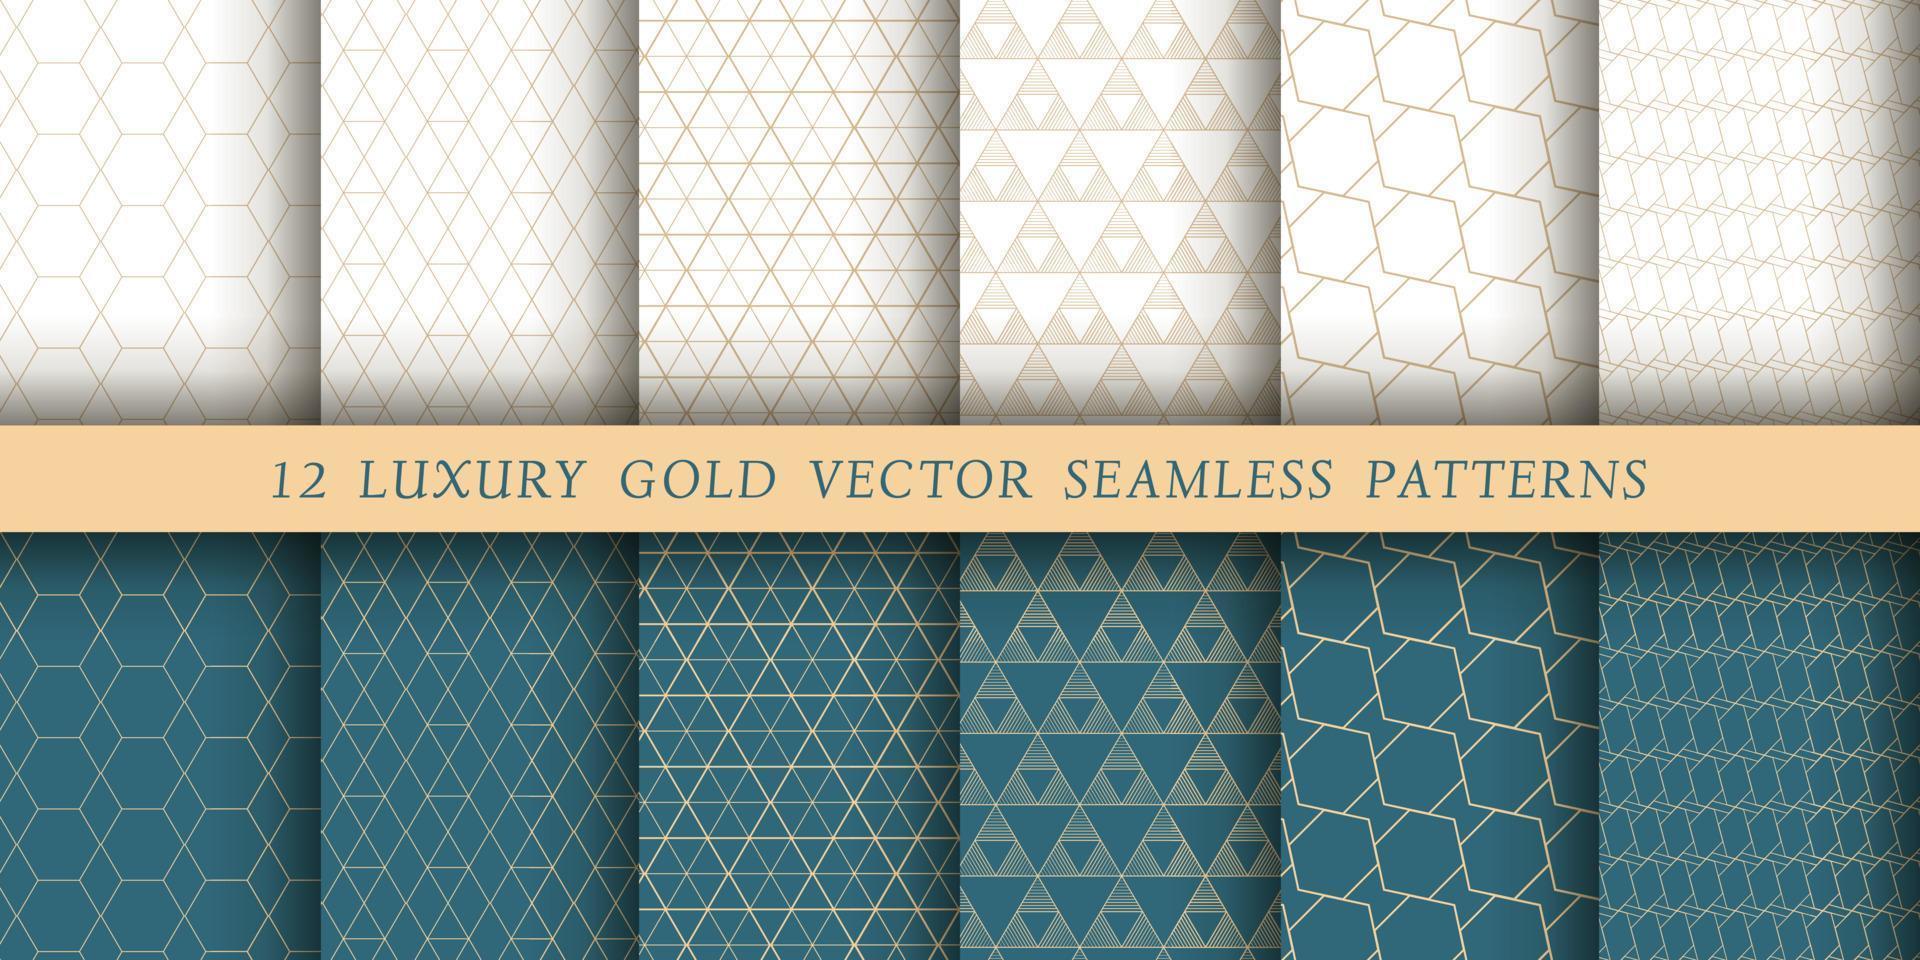 Set of 12 luxurious vector seamless patterns. Geometrical patterns on a white and emerald background. Modern illustrations for wallpapers, flyers, covers, banners, minimalistic ornaments, background